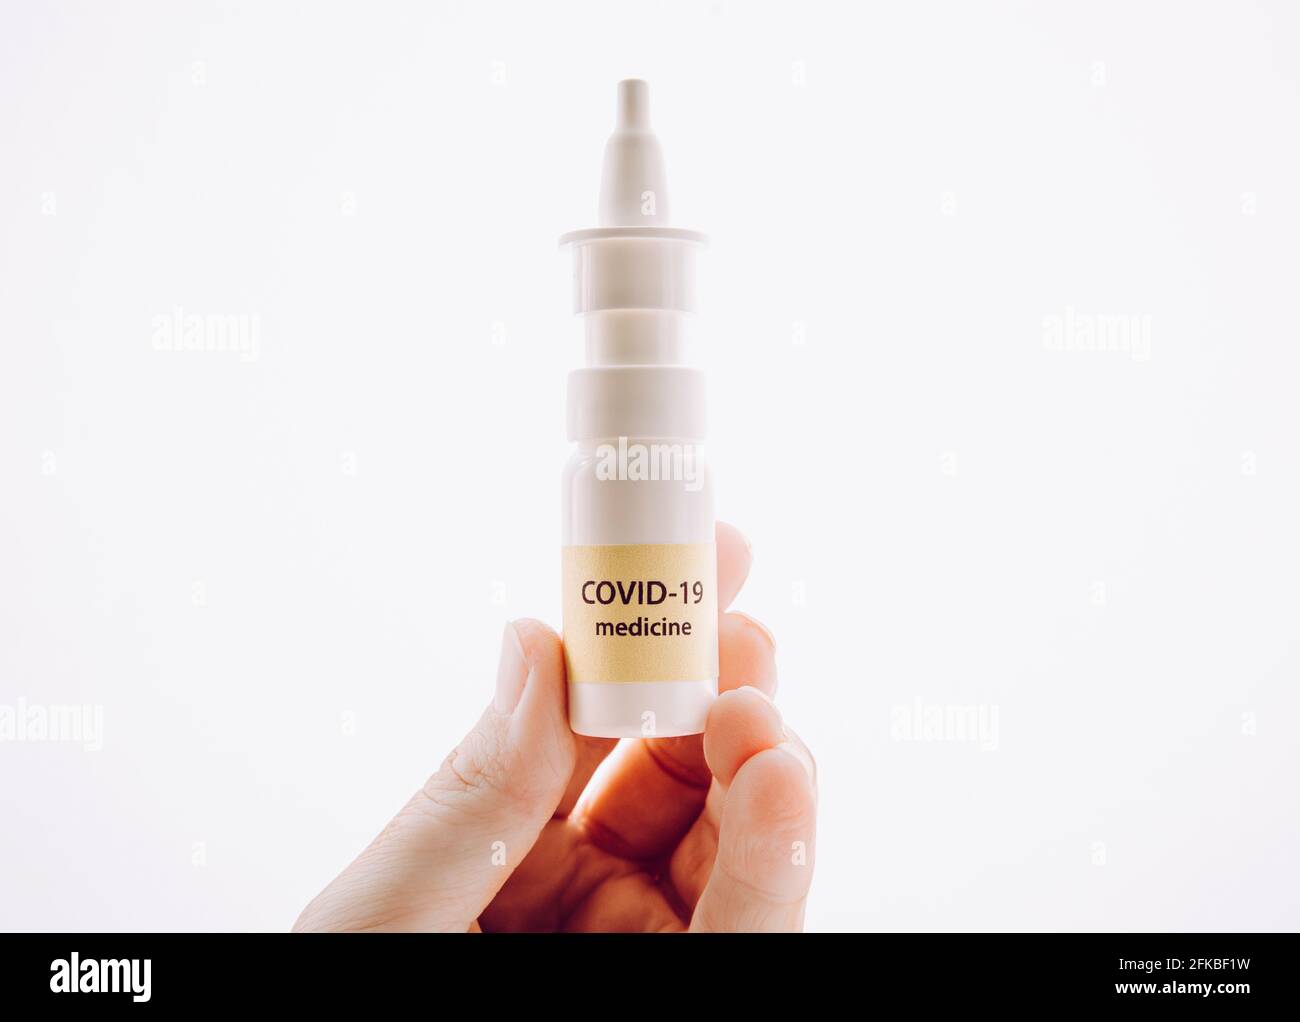 Person holding new treatment against Coronavirus COVID-19 nasal spray. Conceptual image of person hand holding new innovative nasal spray bottle with Stock Photo